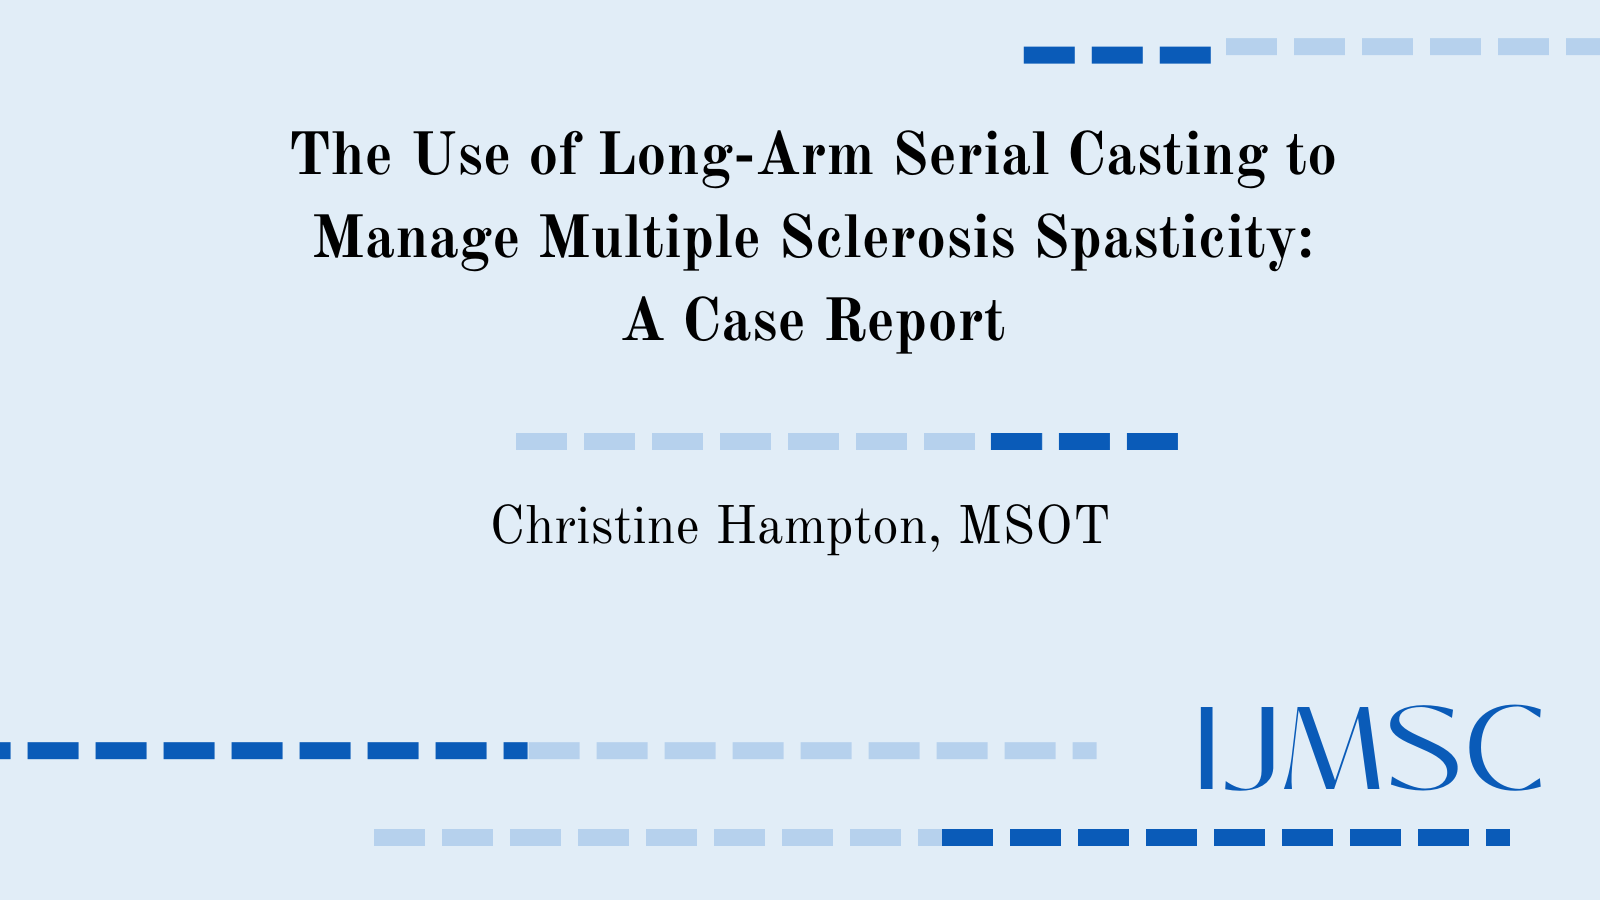 The Use of Long-Arm Serial Casting to Manage Multiple Sclerosis Spasticity: A Case Report 